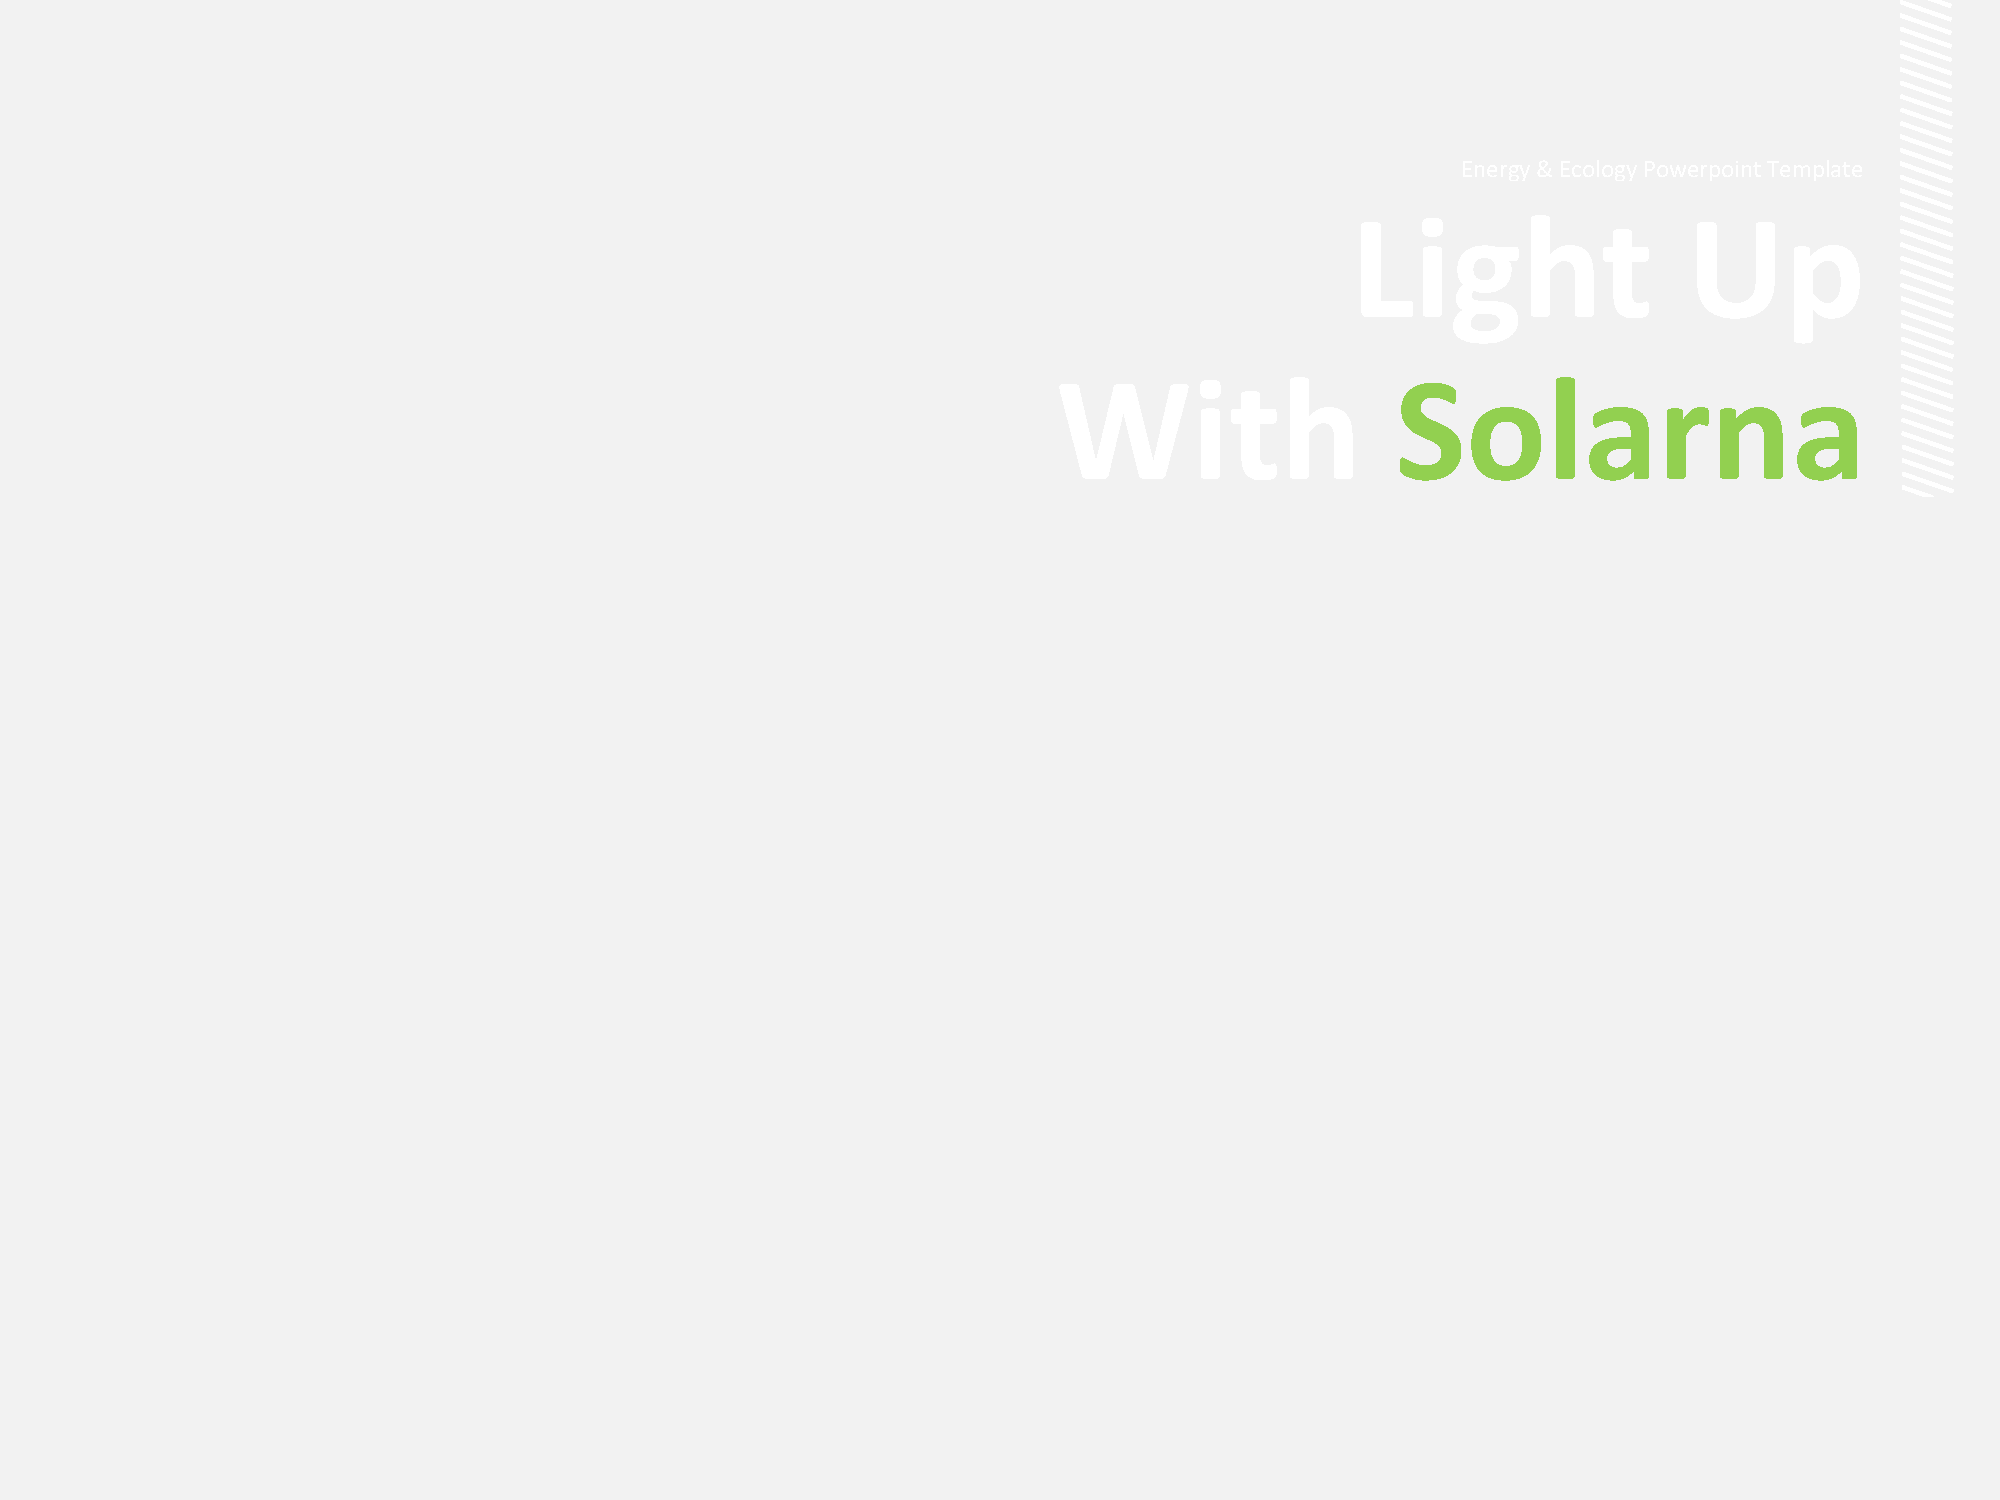 solarna-energy-ecology-powerpoint-template-4TAM9VY